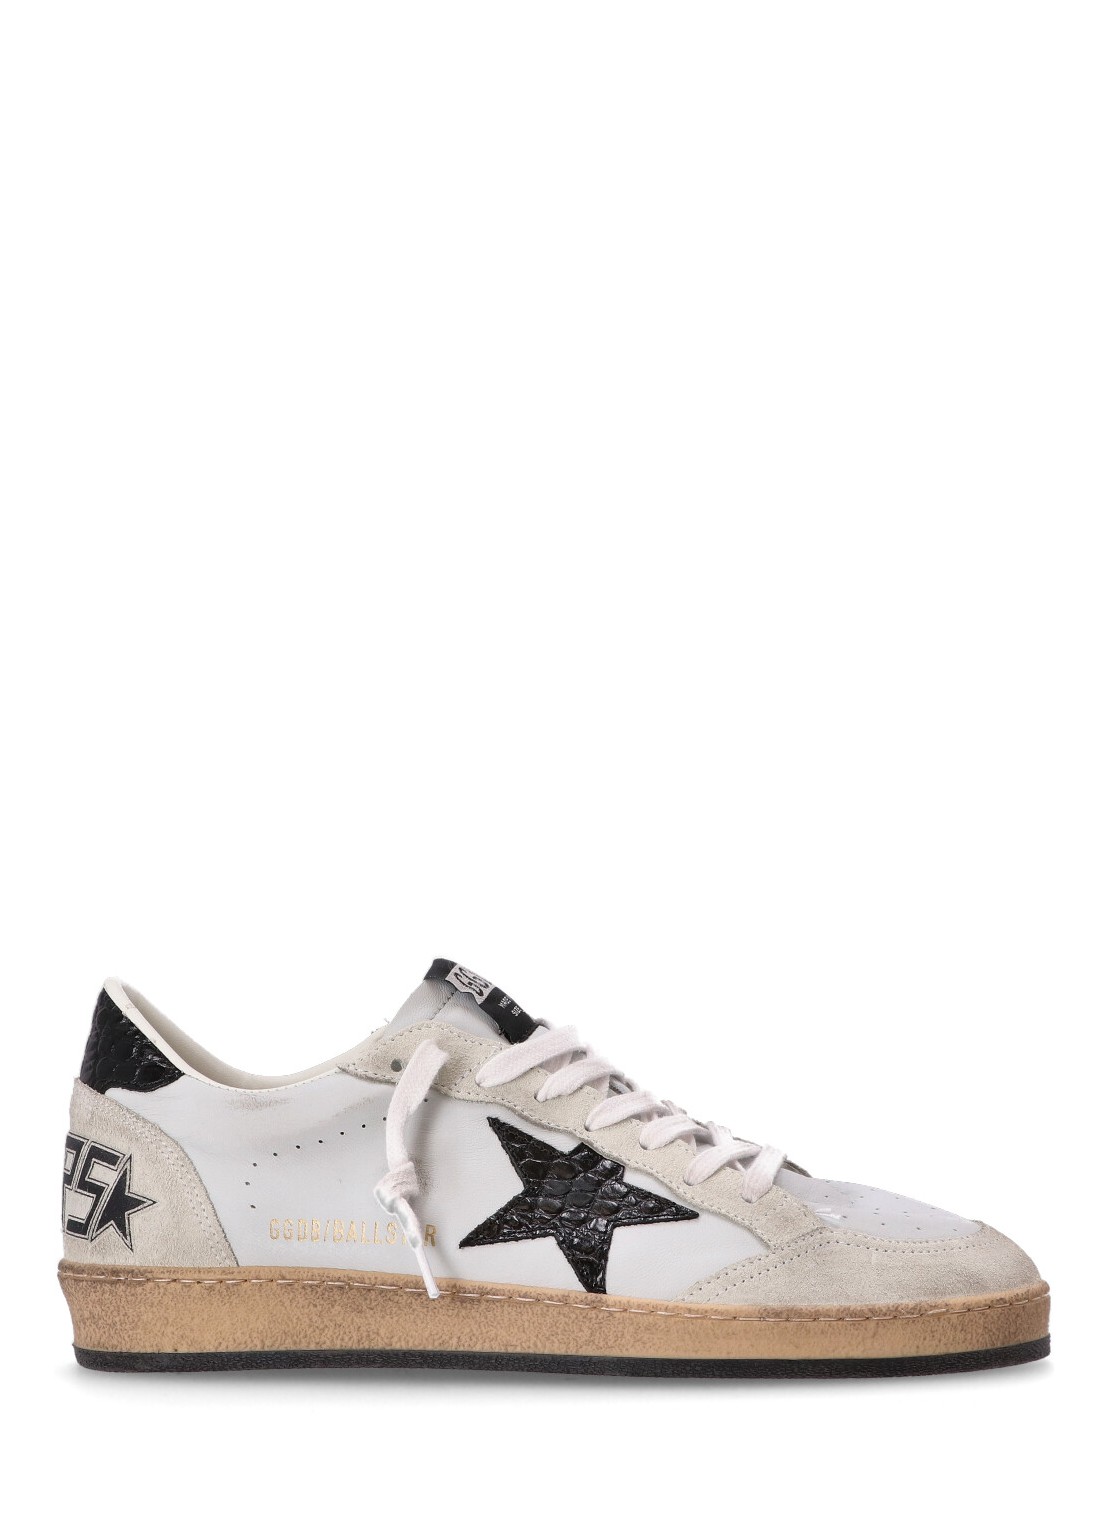 BALL STAR NAPPA UPPER SUEDE TOE AND SPUR COCCO PRINTED STAR